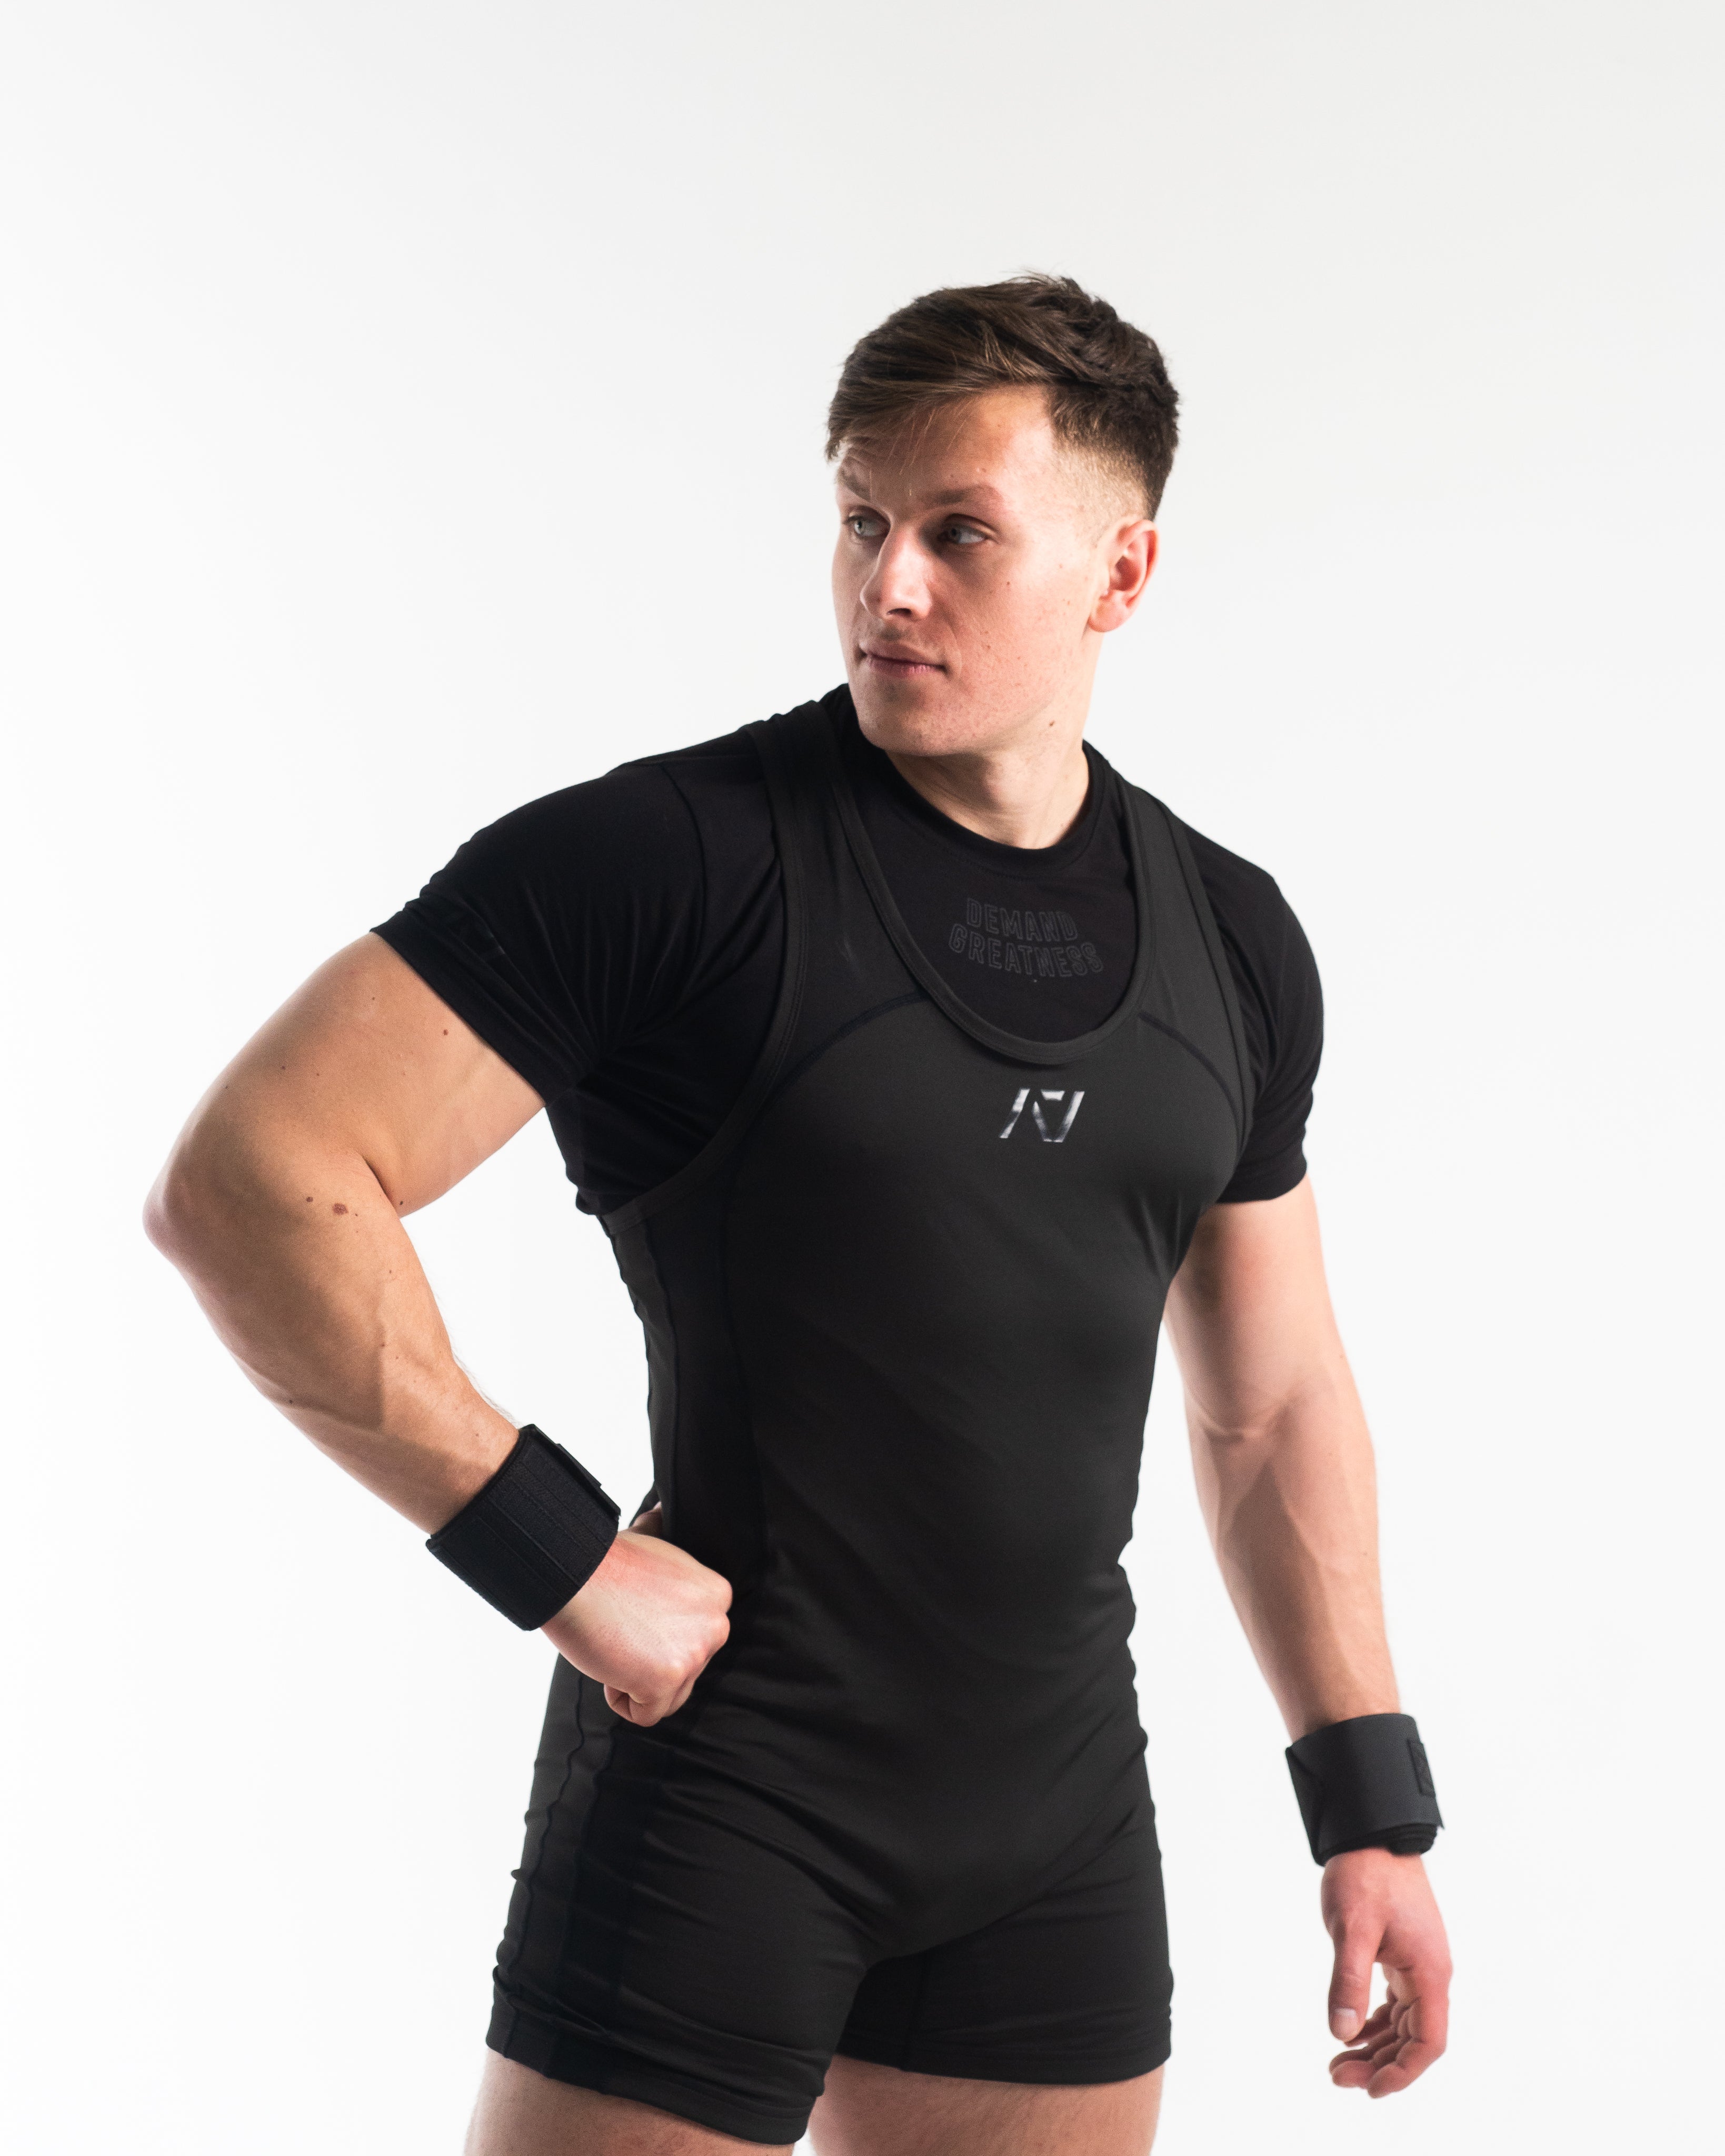 A7 IPF Approved Stealth Luno singlet features extra lat mobility, side panel stitching to guide the squat depth level and curved panel design for a slimming look. The Women's cut singlet features a tapered waist and additional quad room. The IPF Approved Kit includes Luno Powerlifting Singlet, A7 Meet Shirt, A7 Zebra Wrist Wraps, A7 Deadlift Socks, Hourglass Knee Sleeves (Stiff Knee Sleeves and Rigor Mortis Knee Sleeves). All A7 Powerlifting Equipment shipping to UK, Norway, Switzerland and Iceland.